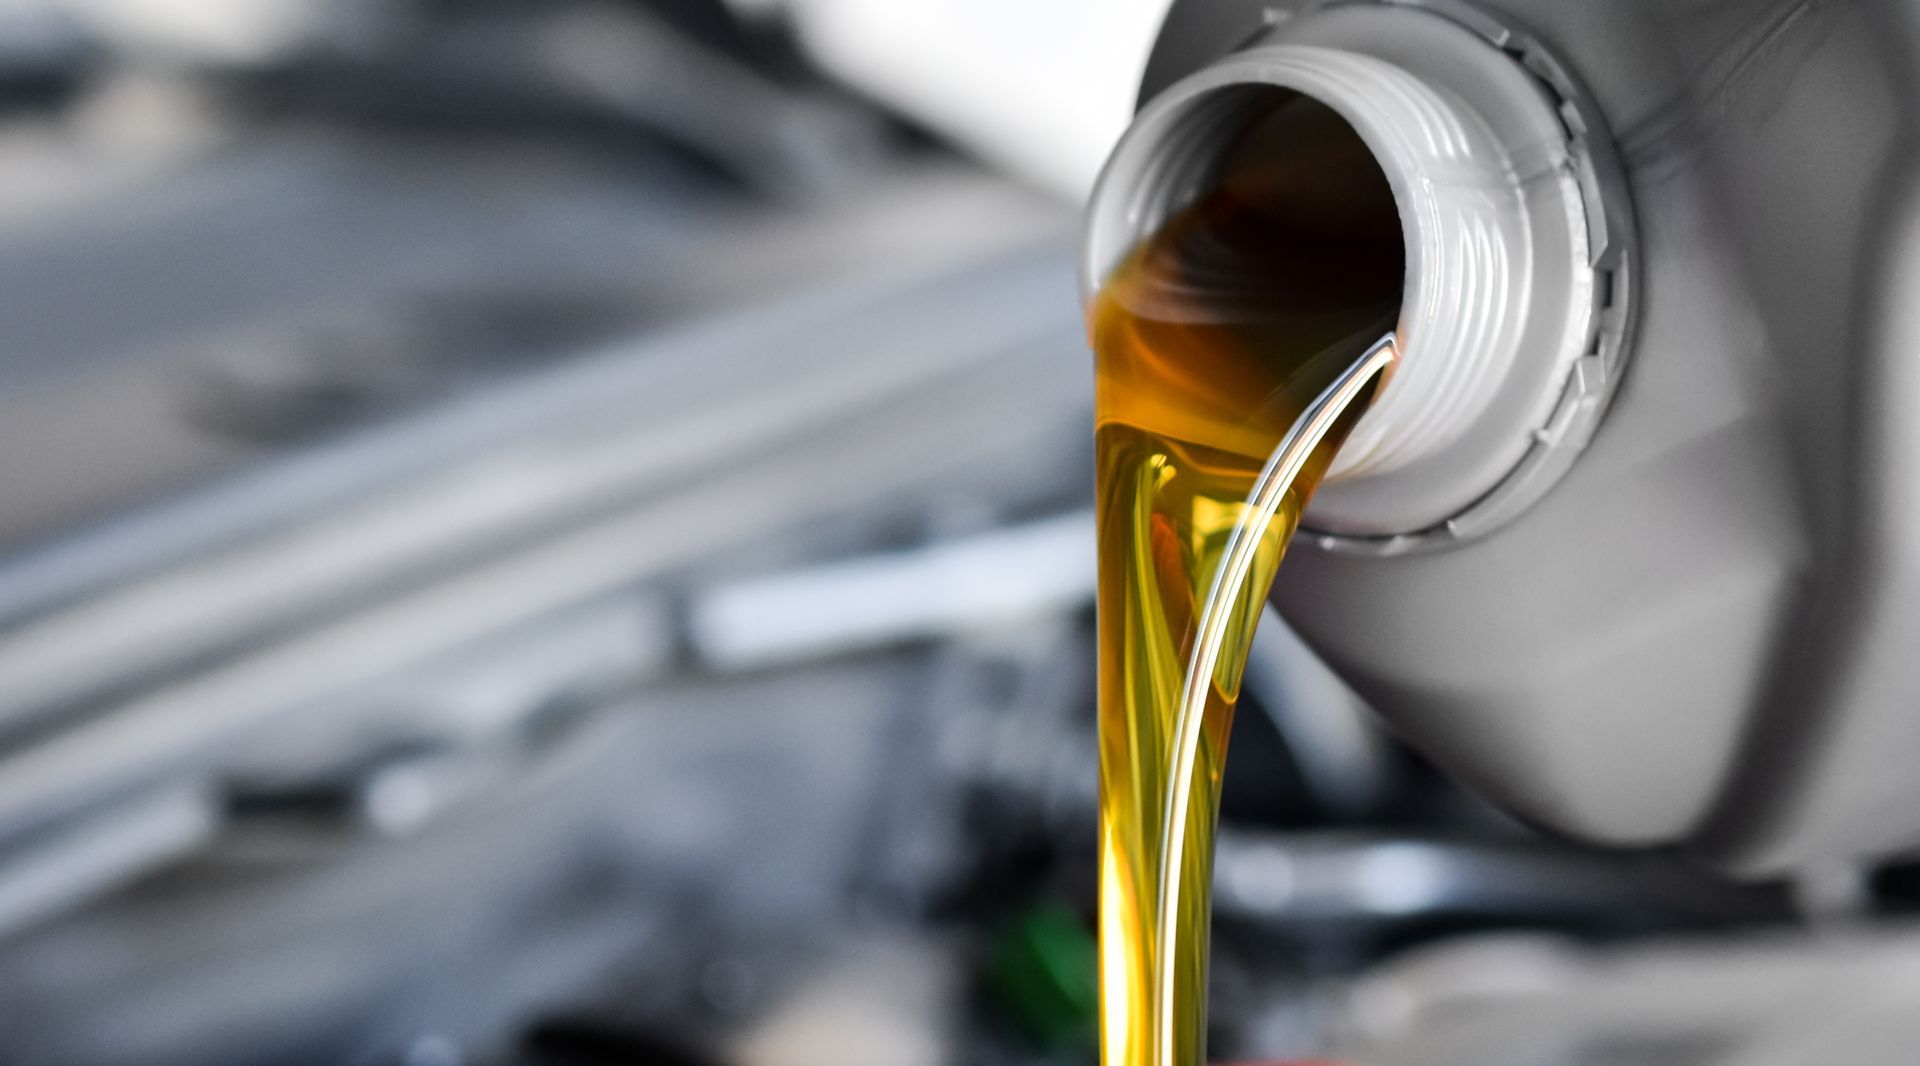 Image showing fresh car oil being poured into the oil filler tube during a routine oil change.